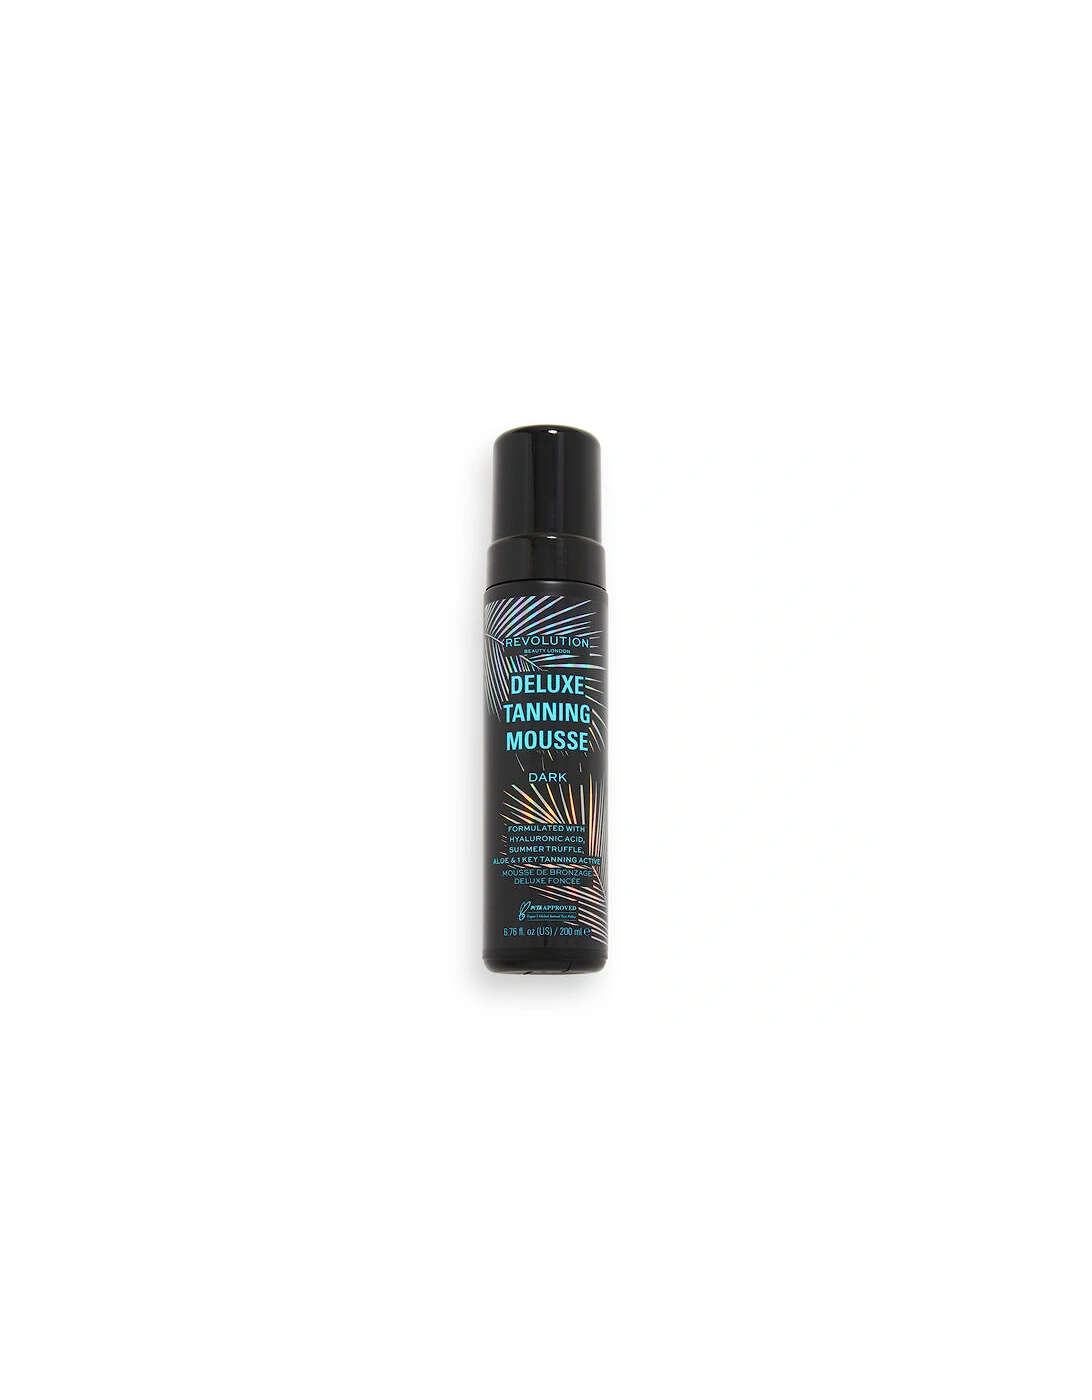 Beauty Deluxe Tanning Mousse Dark, 2 of 1